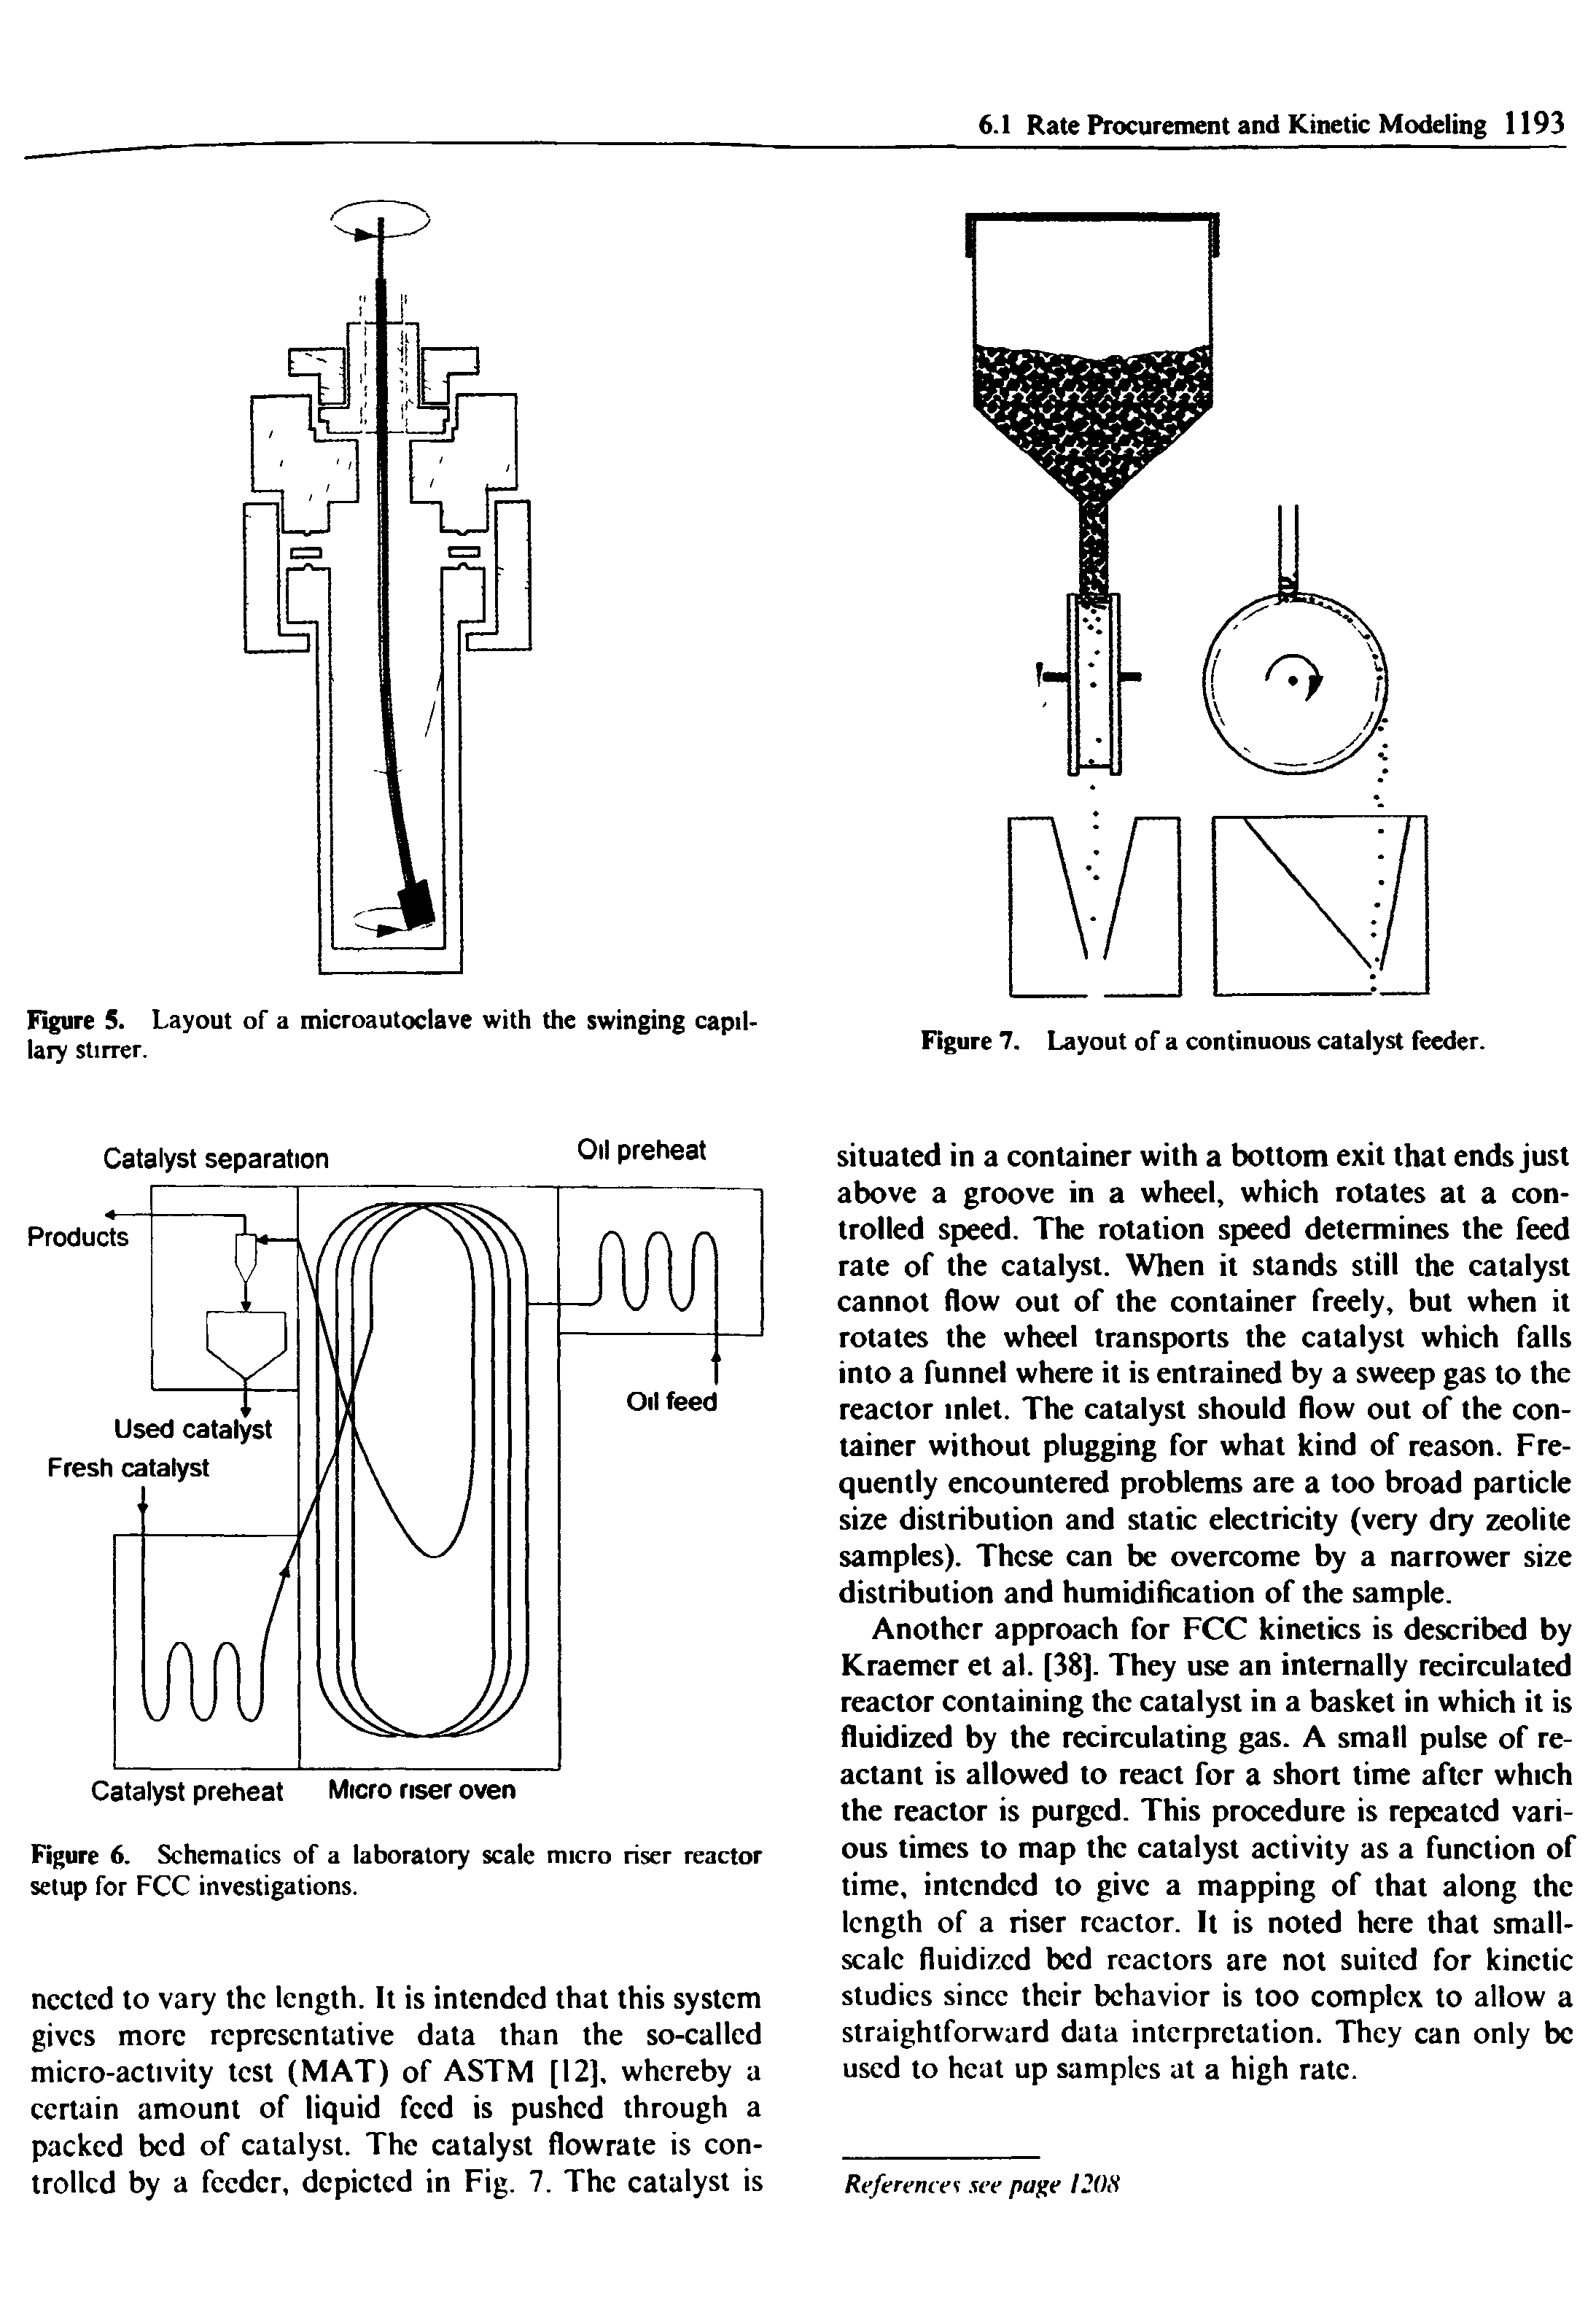 Figure 5. Layout of a microautoclave with the swinging capillary stirrer.